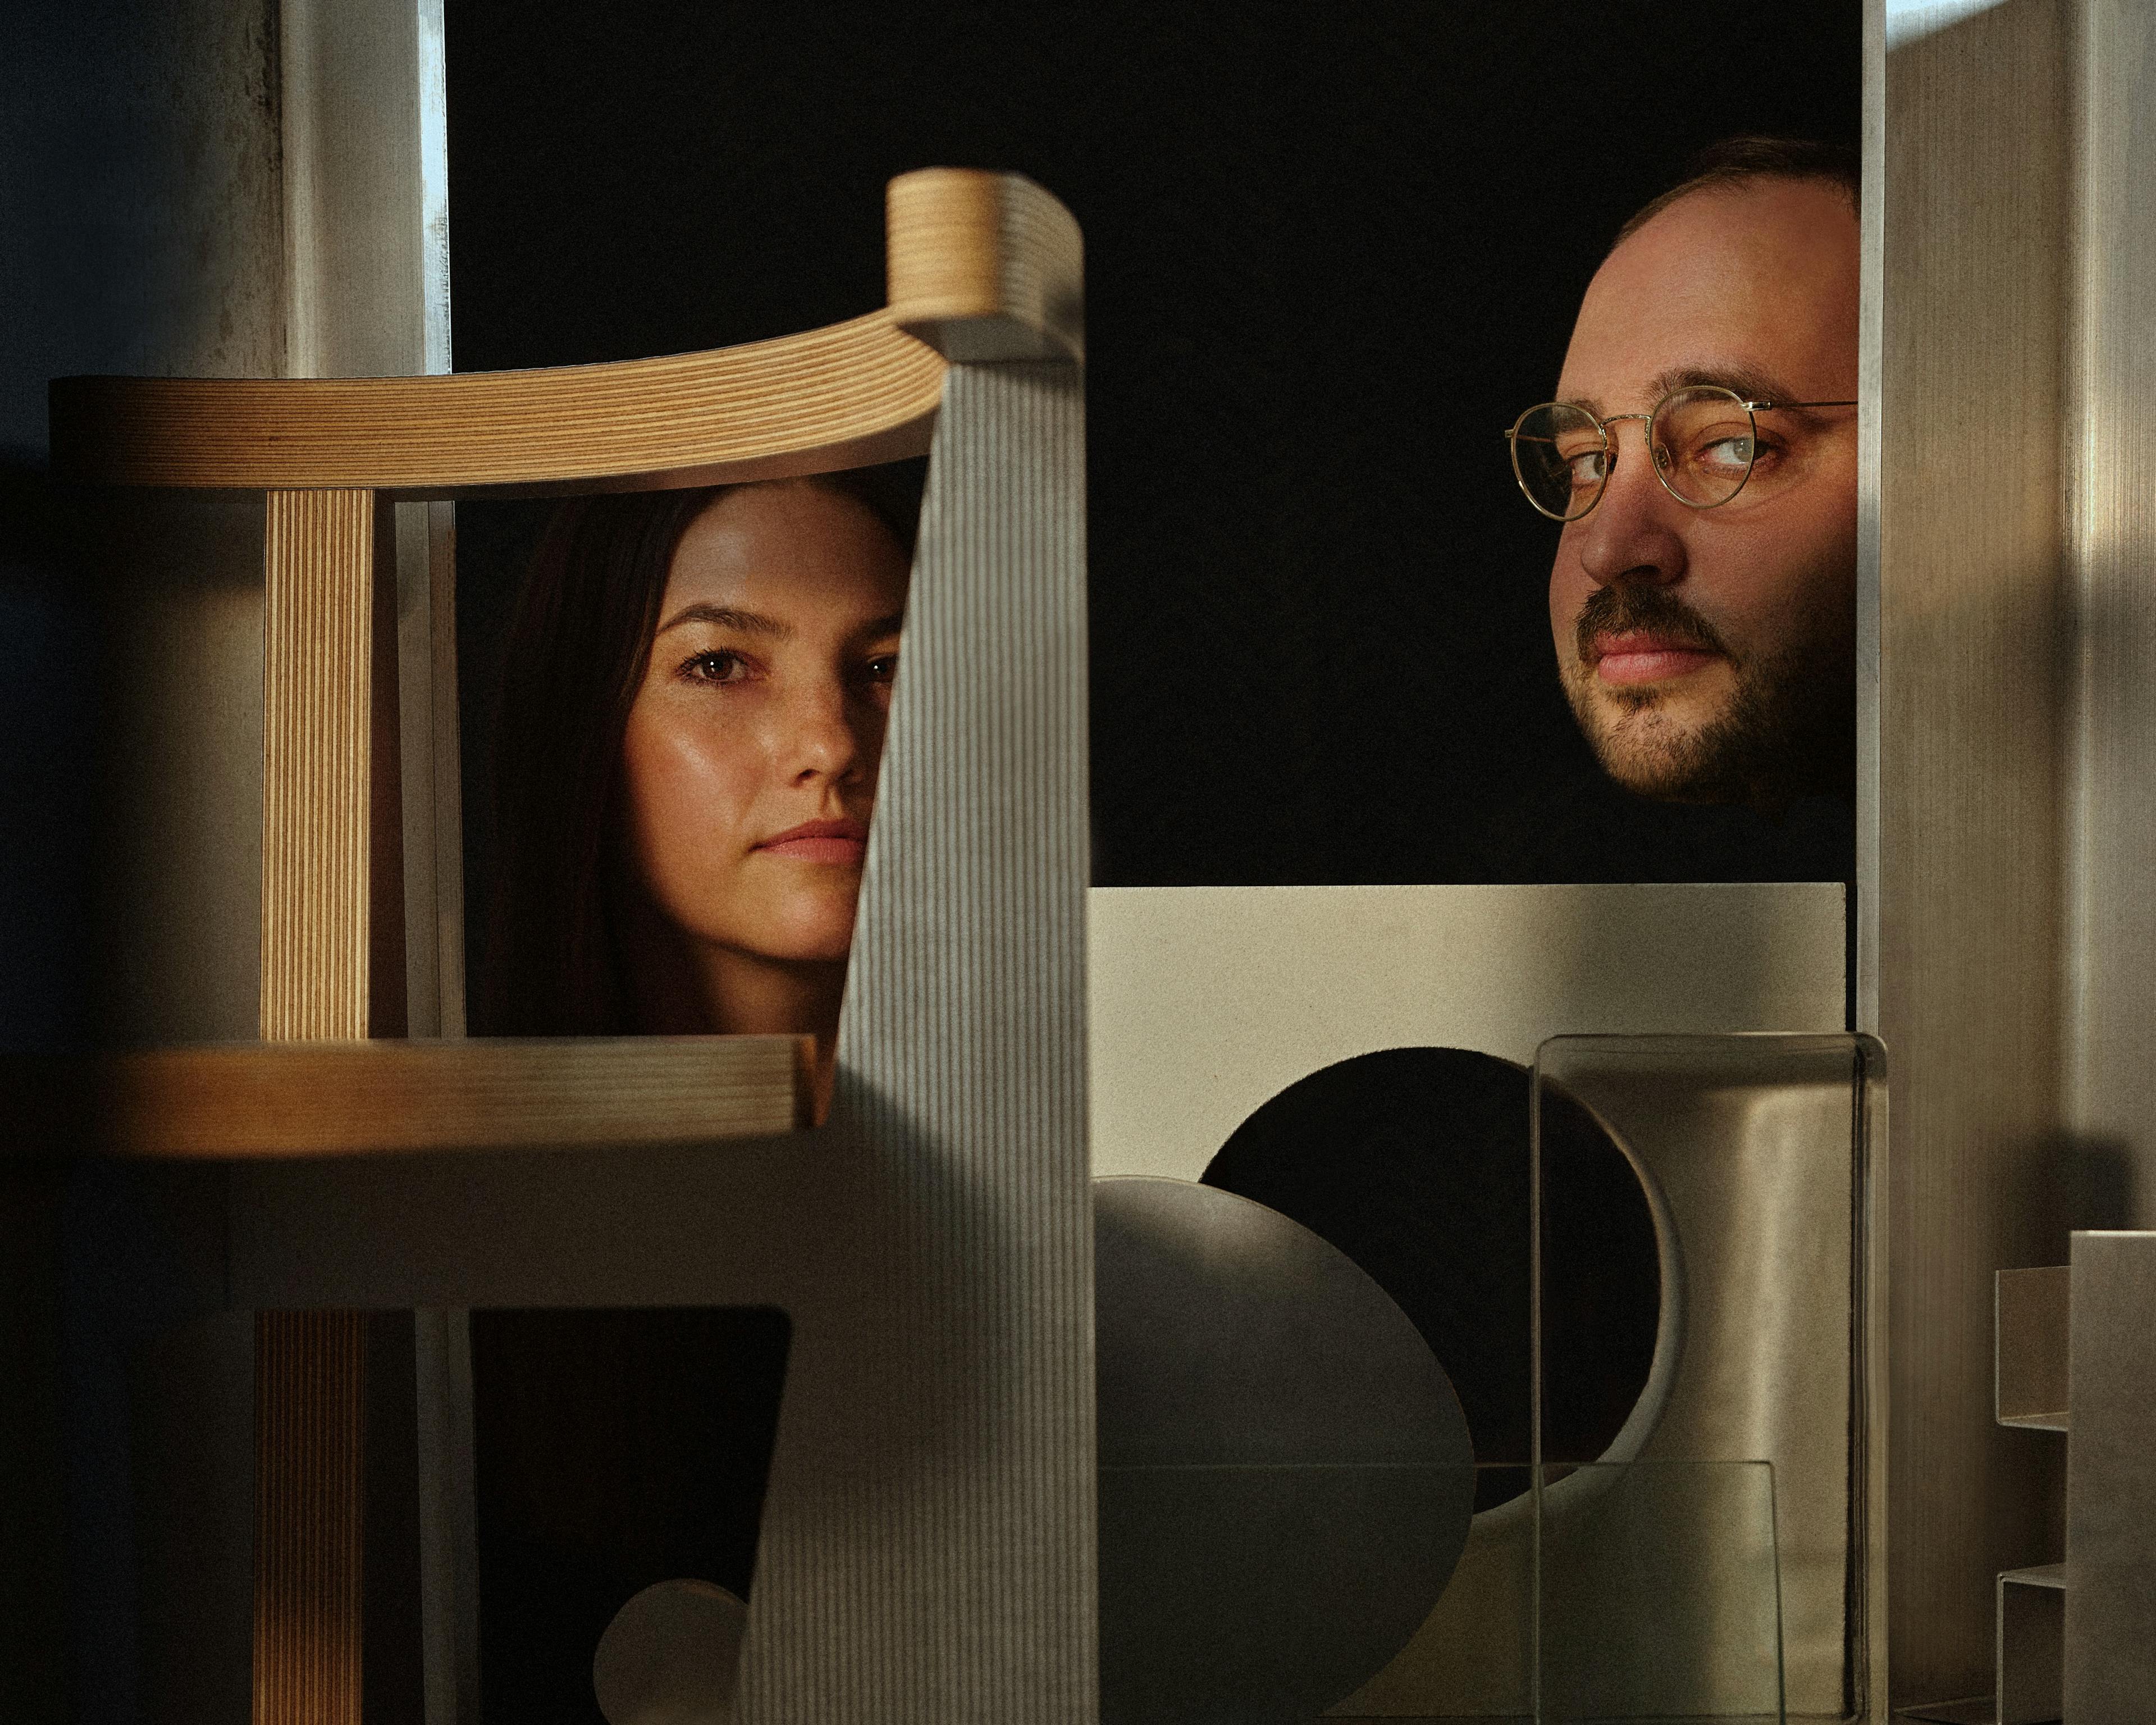 Architects Michael Yarinsky and Kelley Perumbeti in the shadows within crevices of modern furniture.